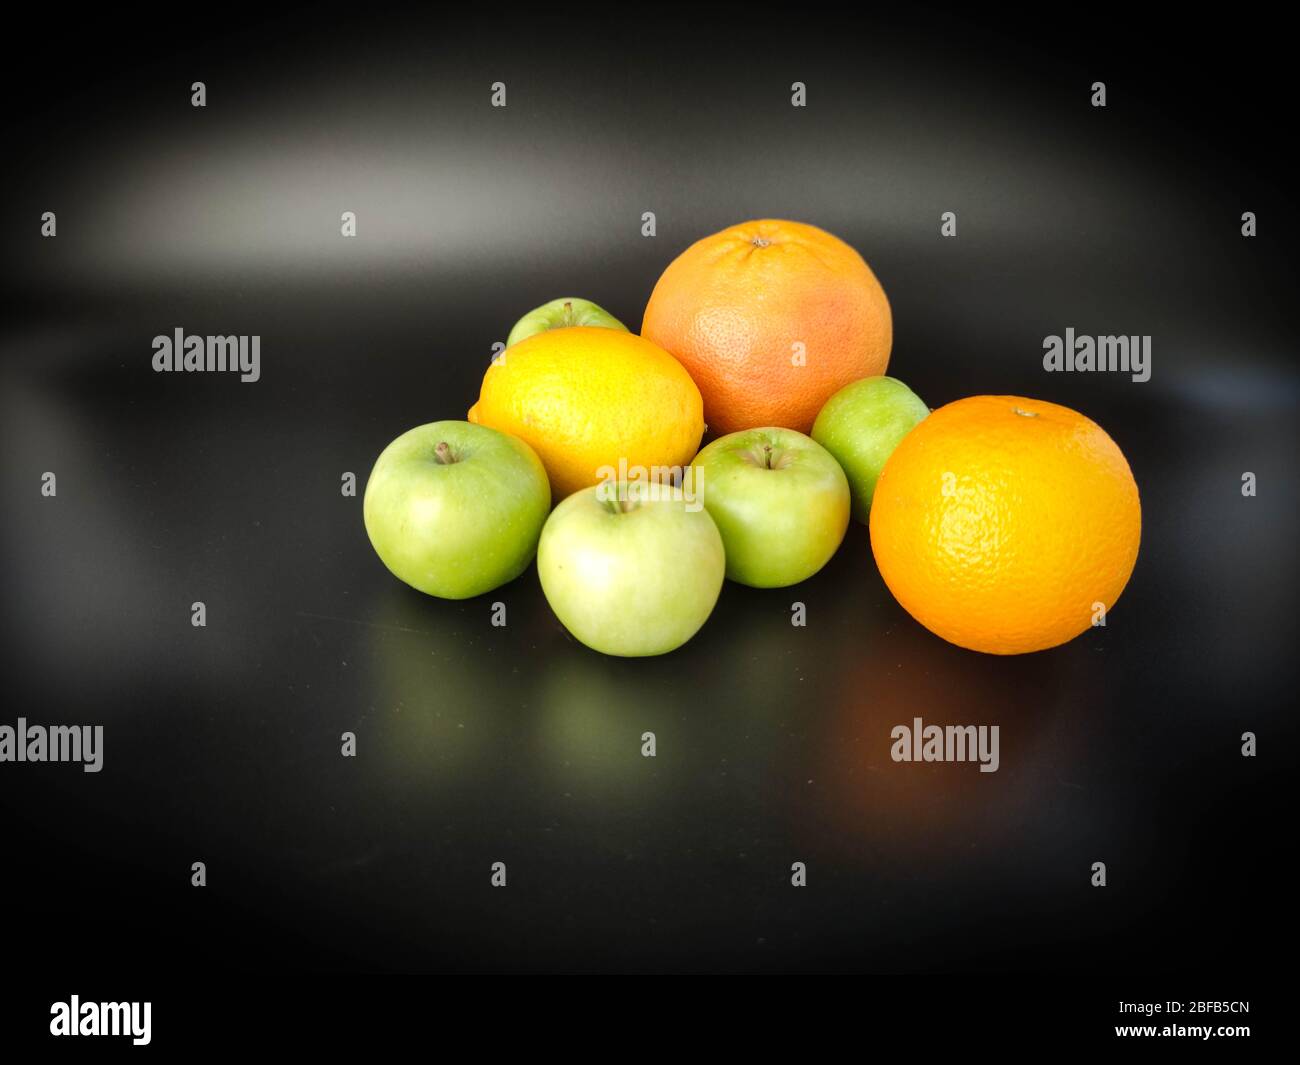 Whole fruits green apples, orange, grapefruit and lemon on black background. Concept - vegetarian and healthy food to improve the immunity Stock photo Stock Photo